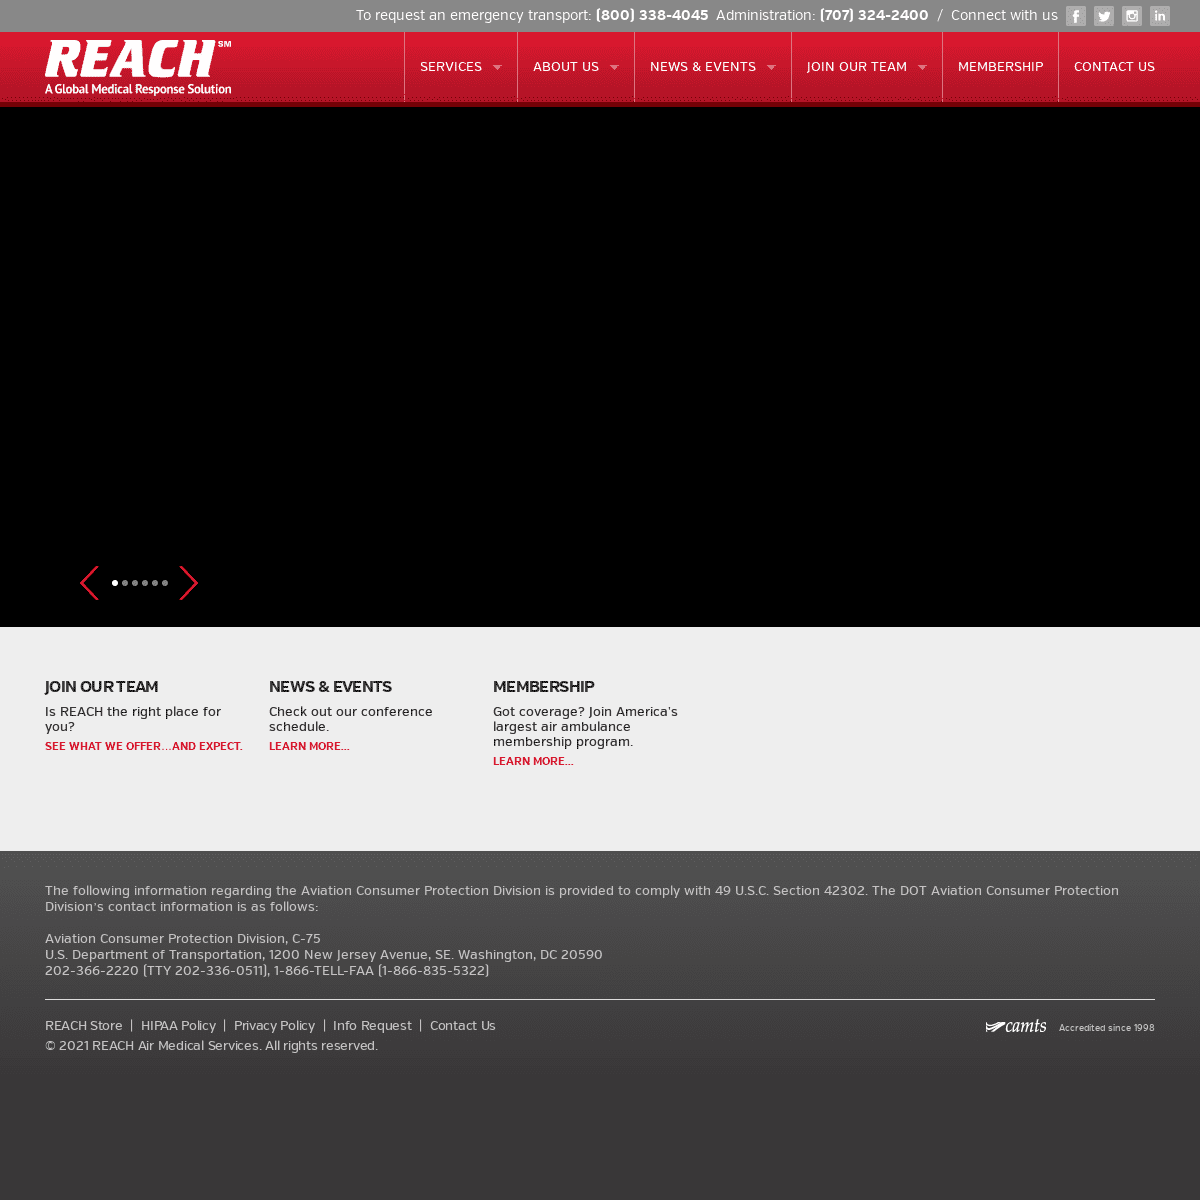 A complete backup of https://reachair.com